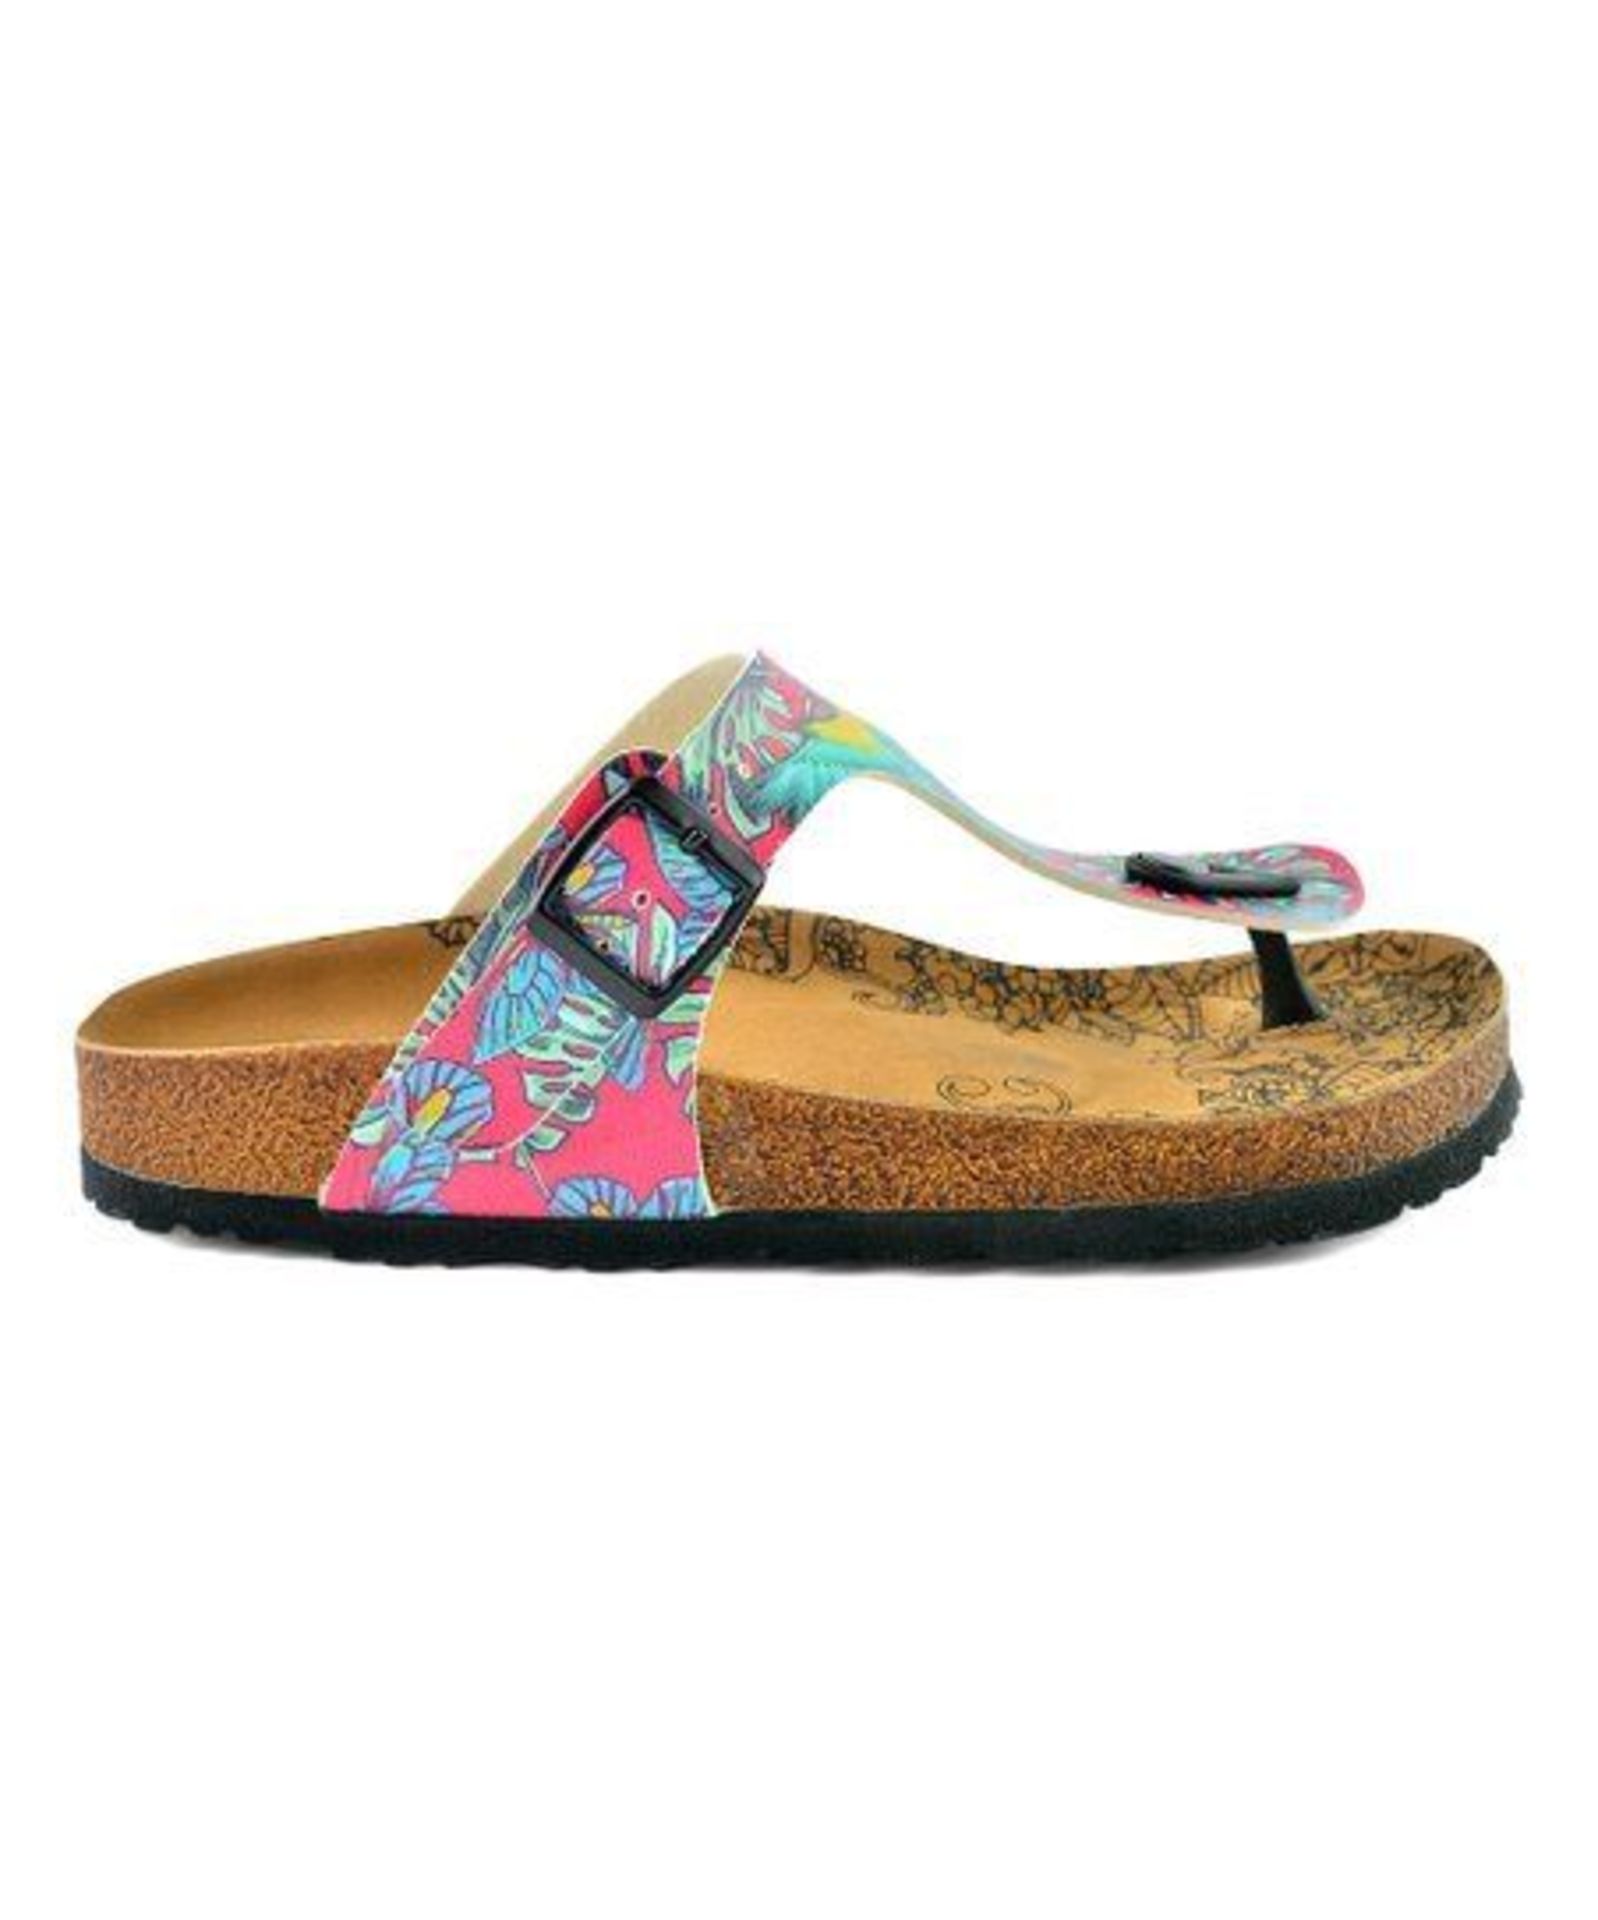 Calceo, Pink & Turquoise T-Strap Sandal - Women, Size Uk 2.5 Eur 35 (New With Box) [Ref: 47526520A/ - Image 2 of 4